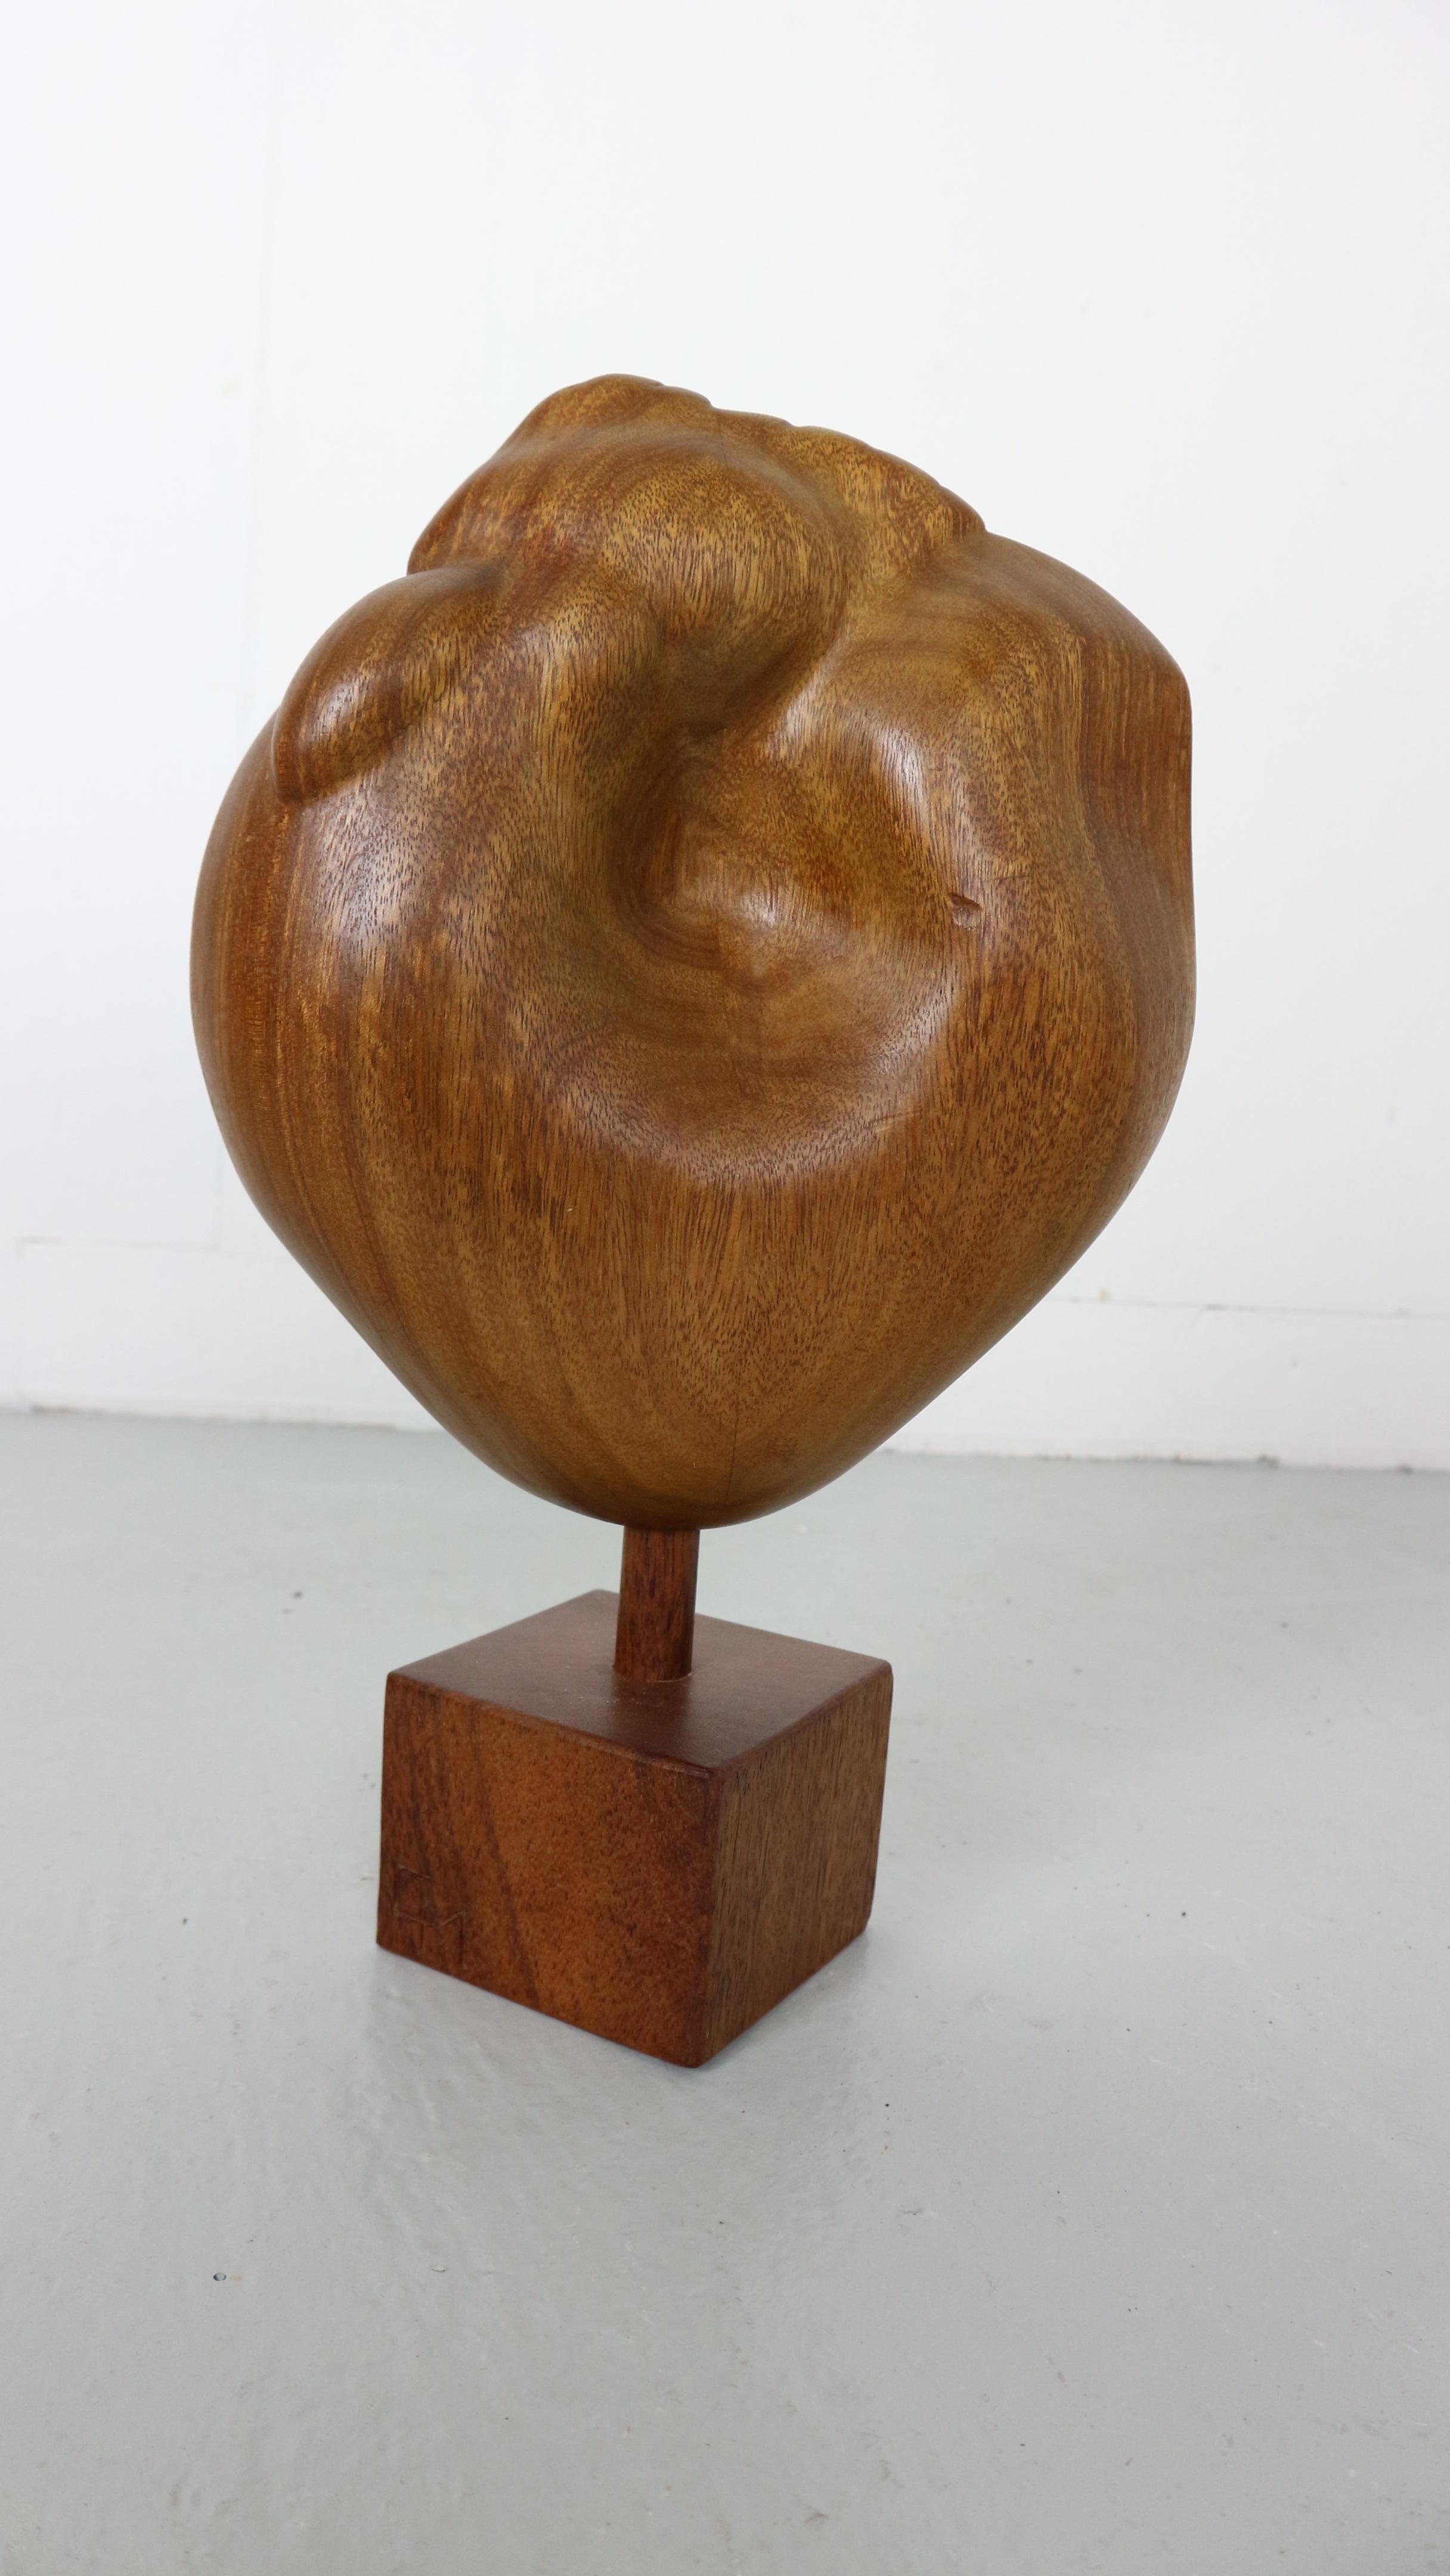 Beautifully shaped organic rooster artwork curved wood.
Made in the 1950s by unknown maker, the artwork is marked by C.M. 
This piece remains in a very good condition and only little traces of wear.
When you are looking for a wooden sculpture